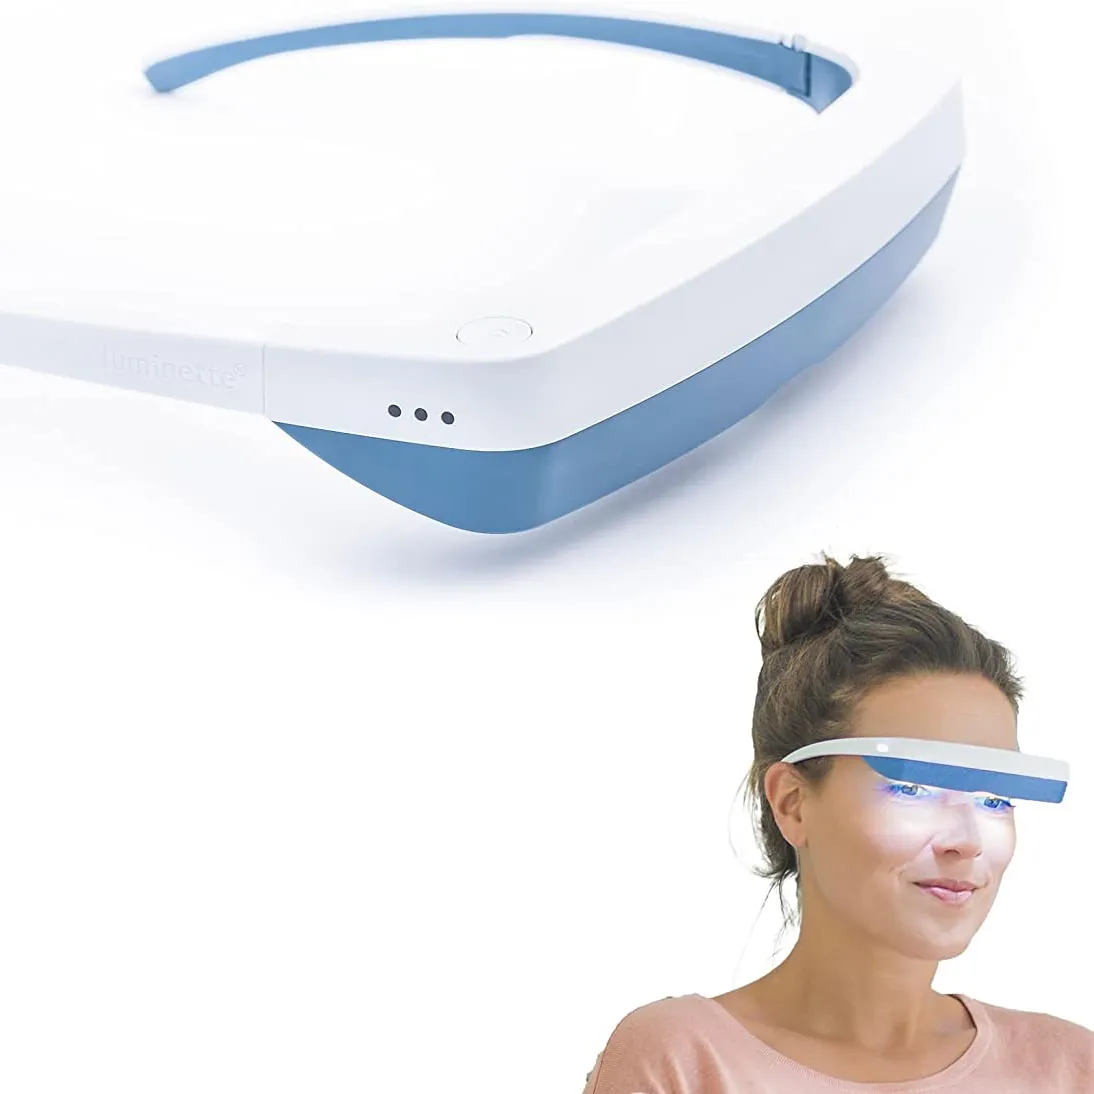 Luminette 3 Light Therapy Glasses Portable Wearable Light Therapy Lamp for Active People